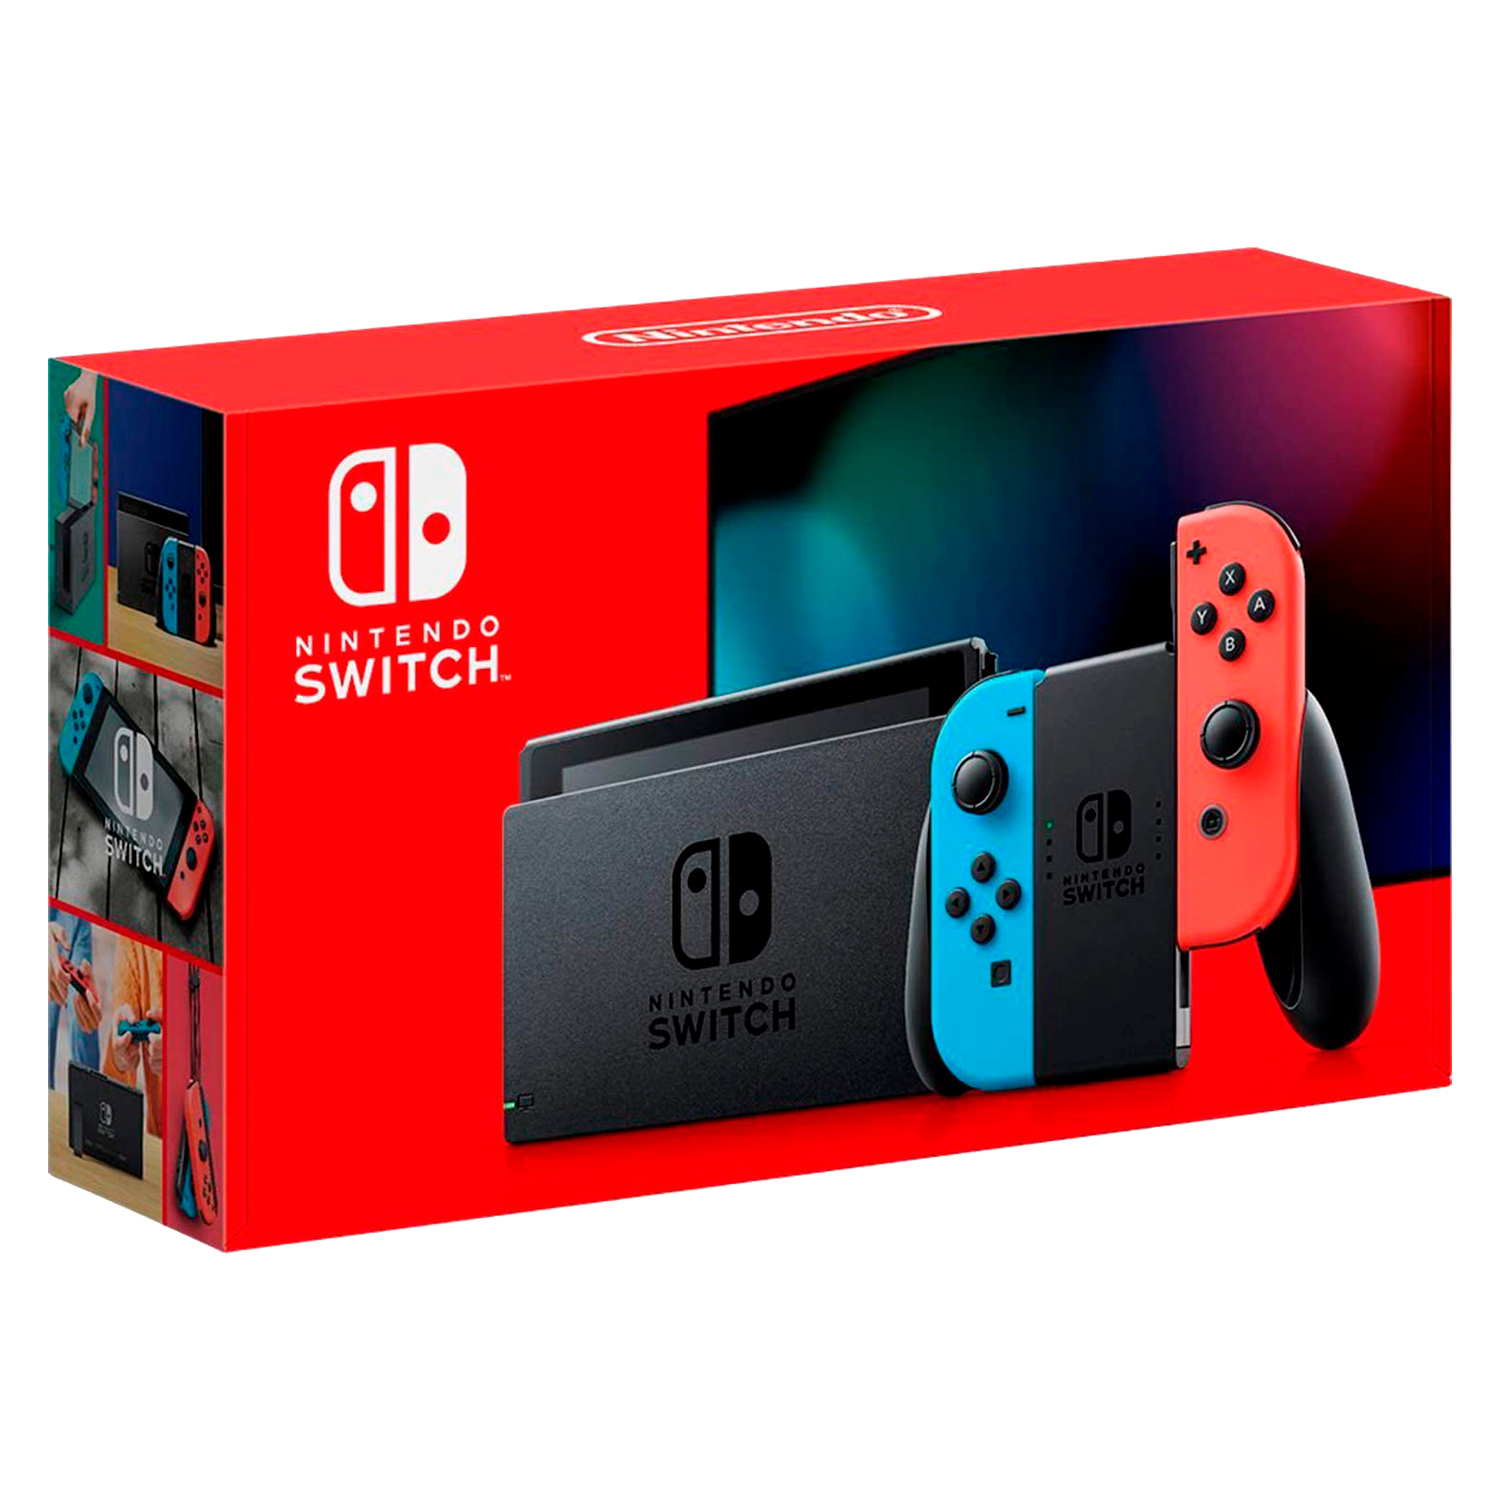 Console Nintendo Switch 32GB Japão - Neon (HAD-S-KABAH)